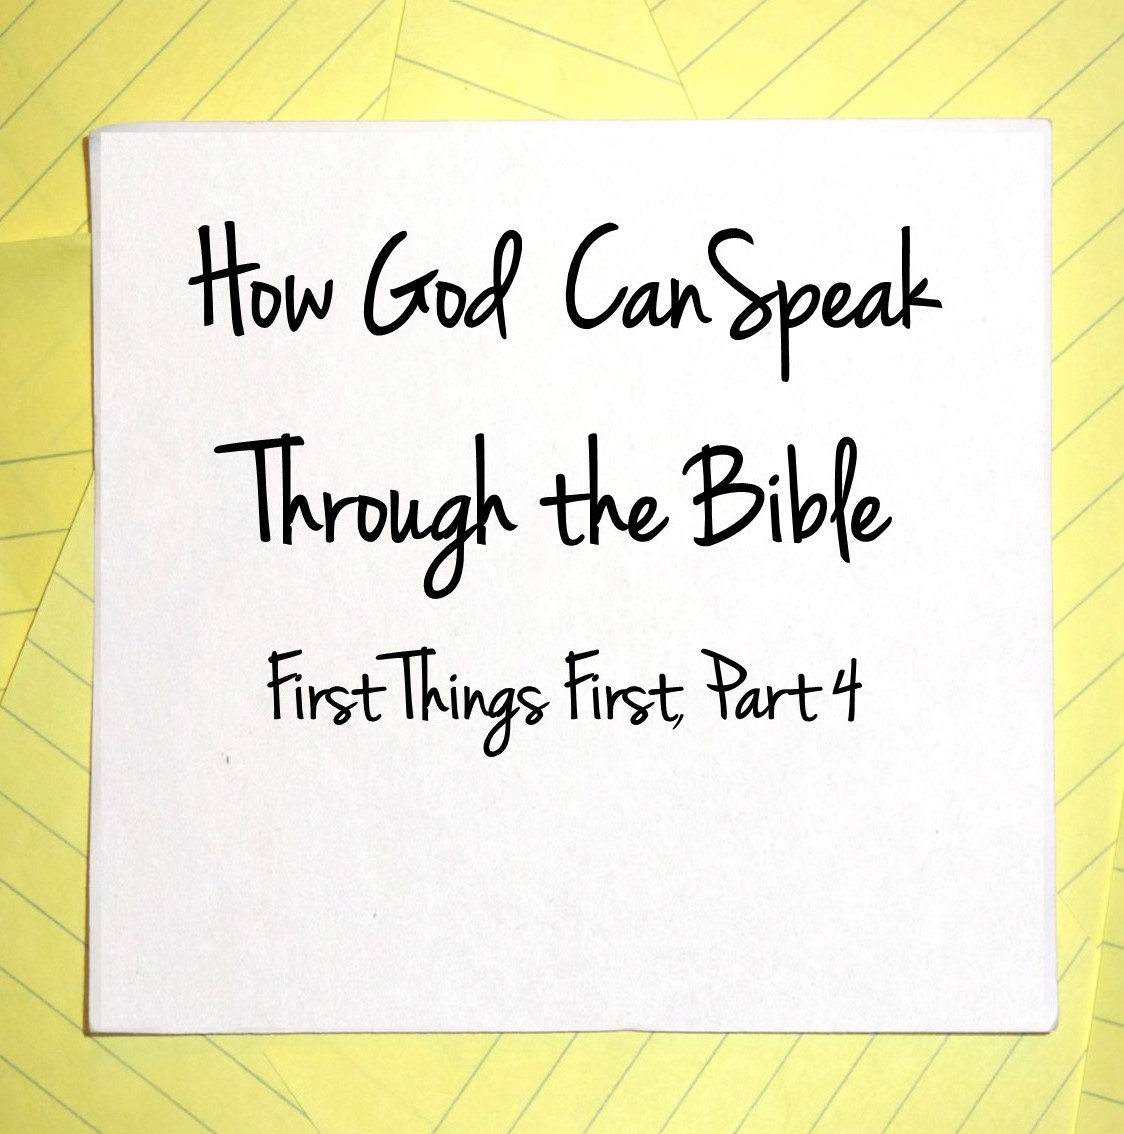 first things first part 4 How God Can Speak